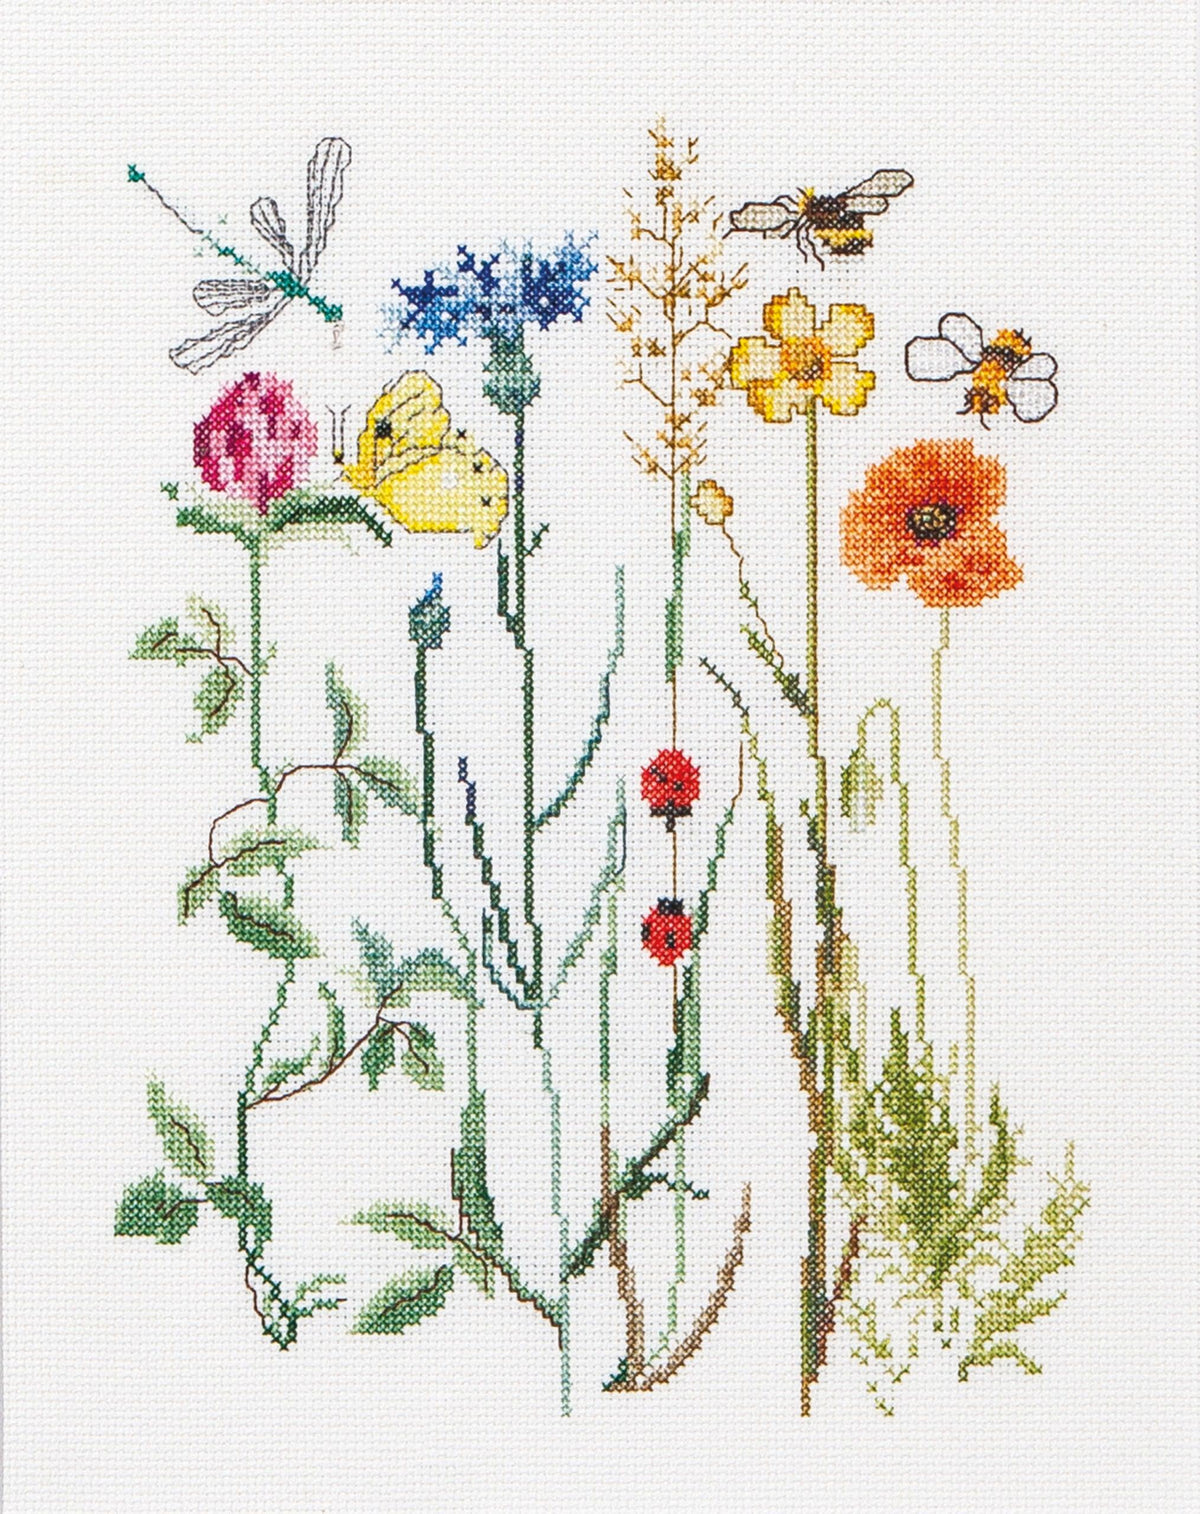 Thea Gouverneur - Counted Cross Stitch Kit - Wildflowers - Linen - 32 count - 577 - Thea Gouverneur Since 1959